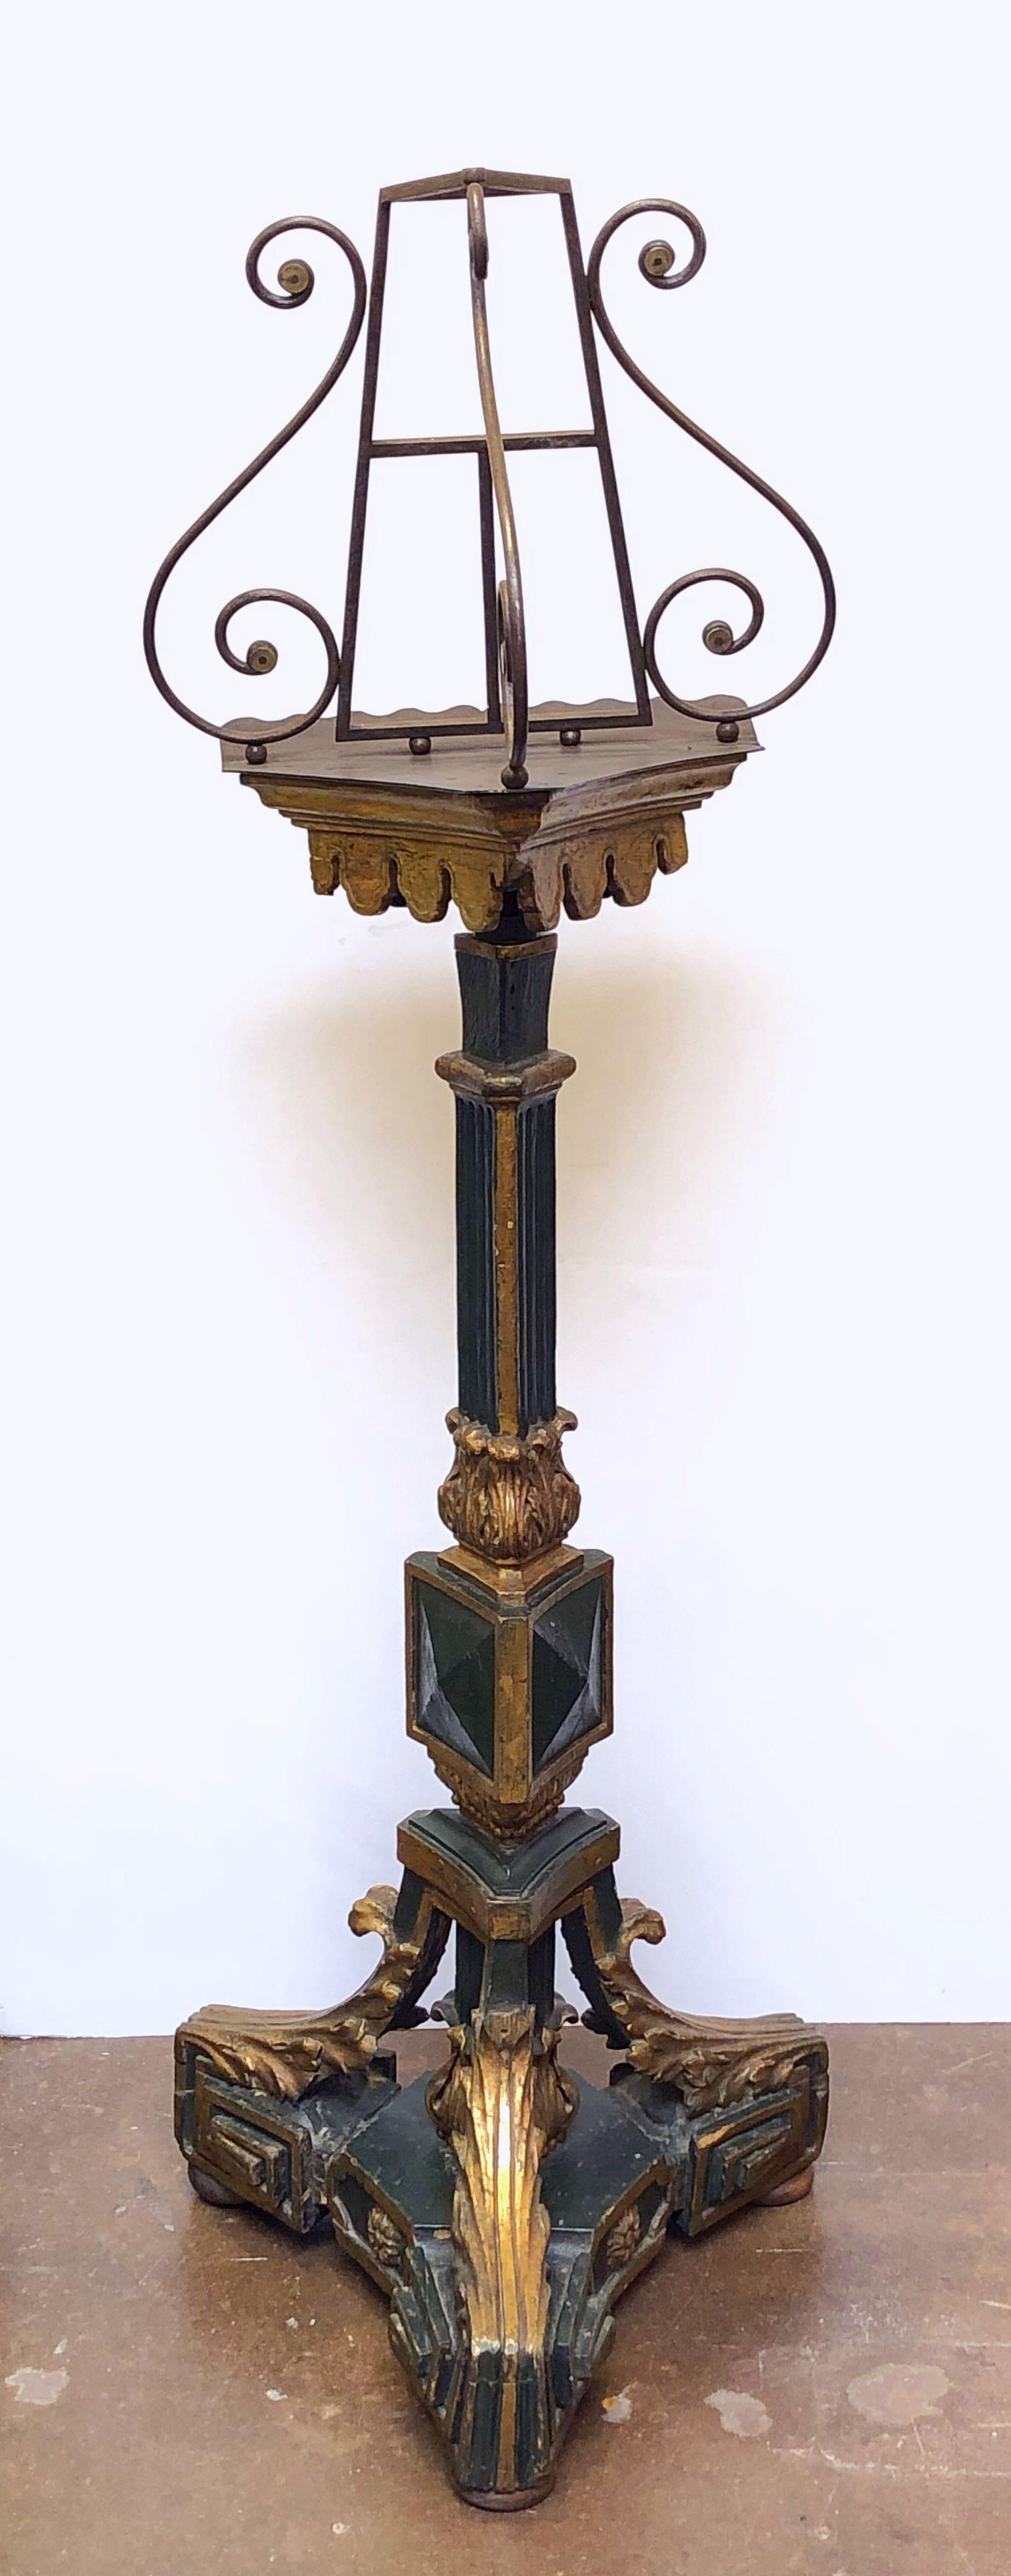 19th Century English Wrought Iron Lectern or Music Stand on Carved Wood Plinth